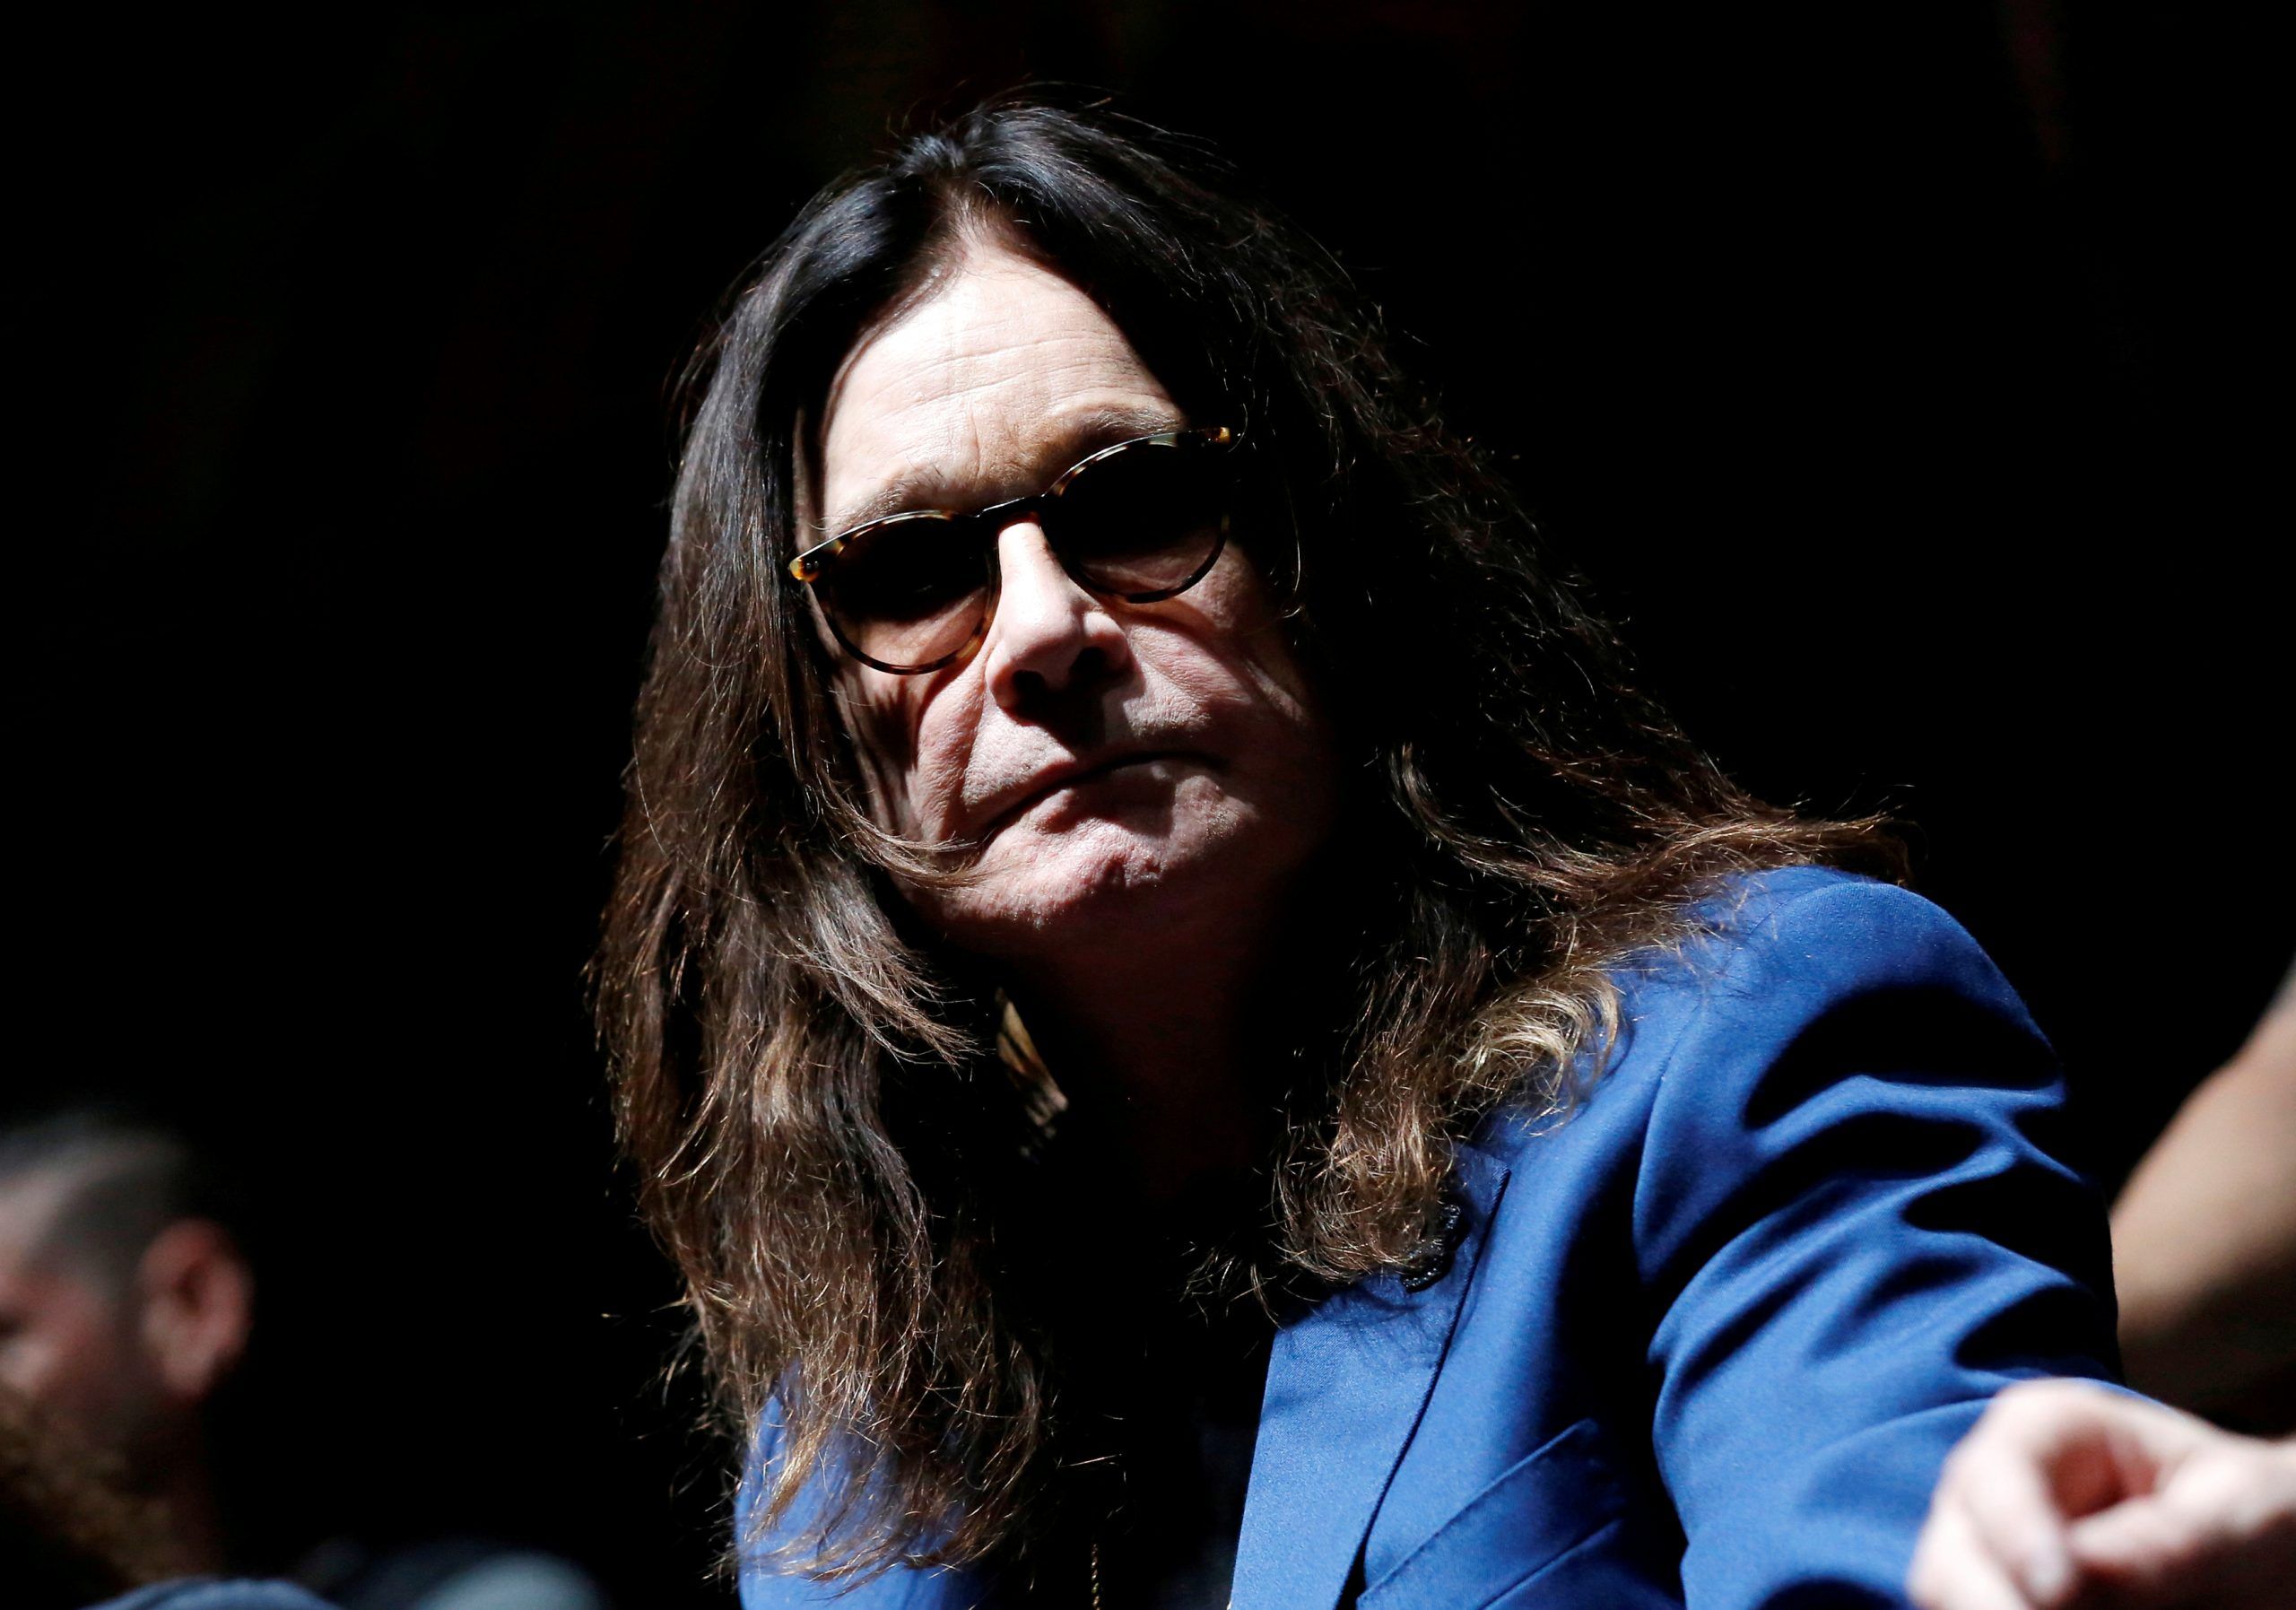 FILE PHOTO: Ozzy Osbourne attends a news conference to announce the "Ozzfest Meets Knotfest" music festival in Los Angeles